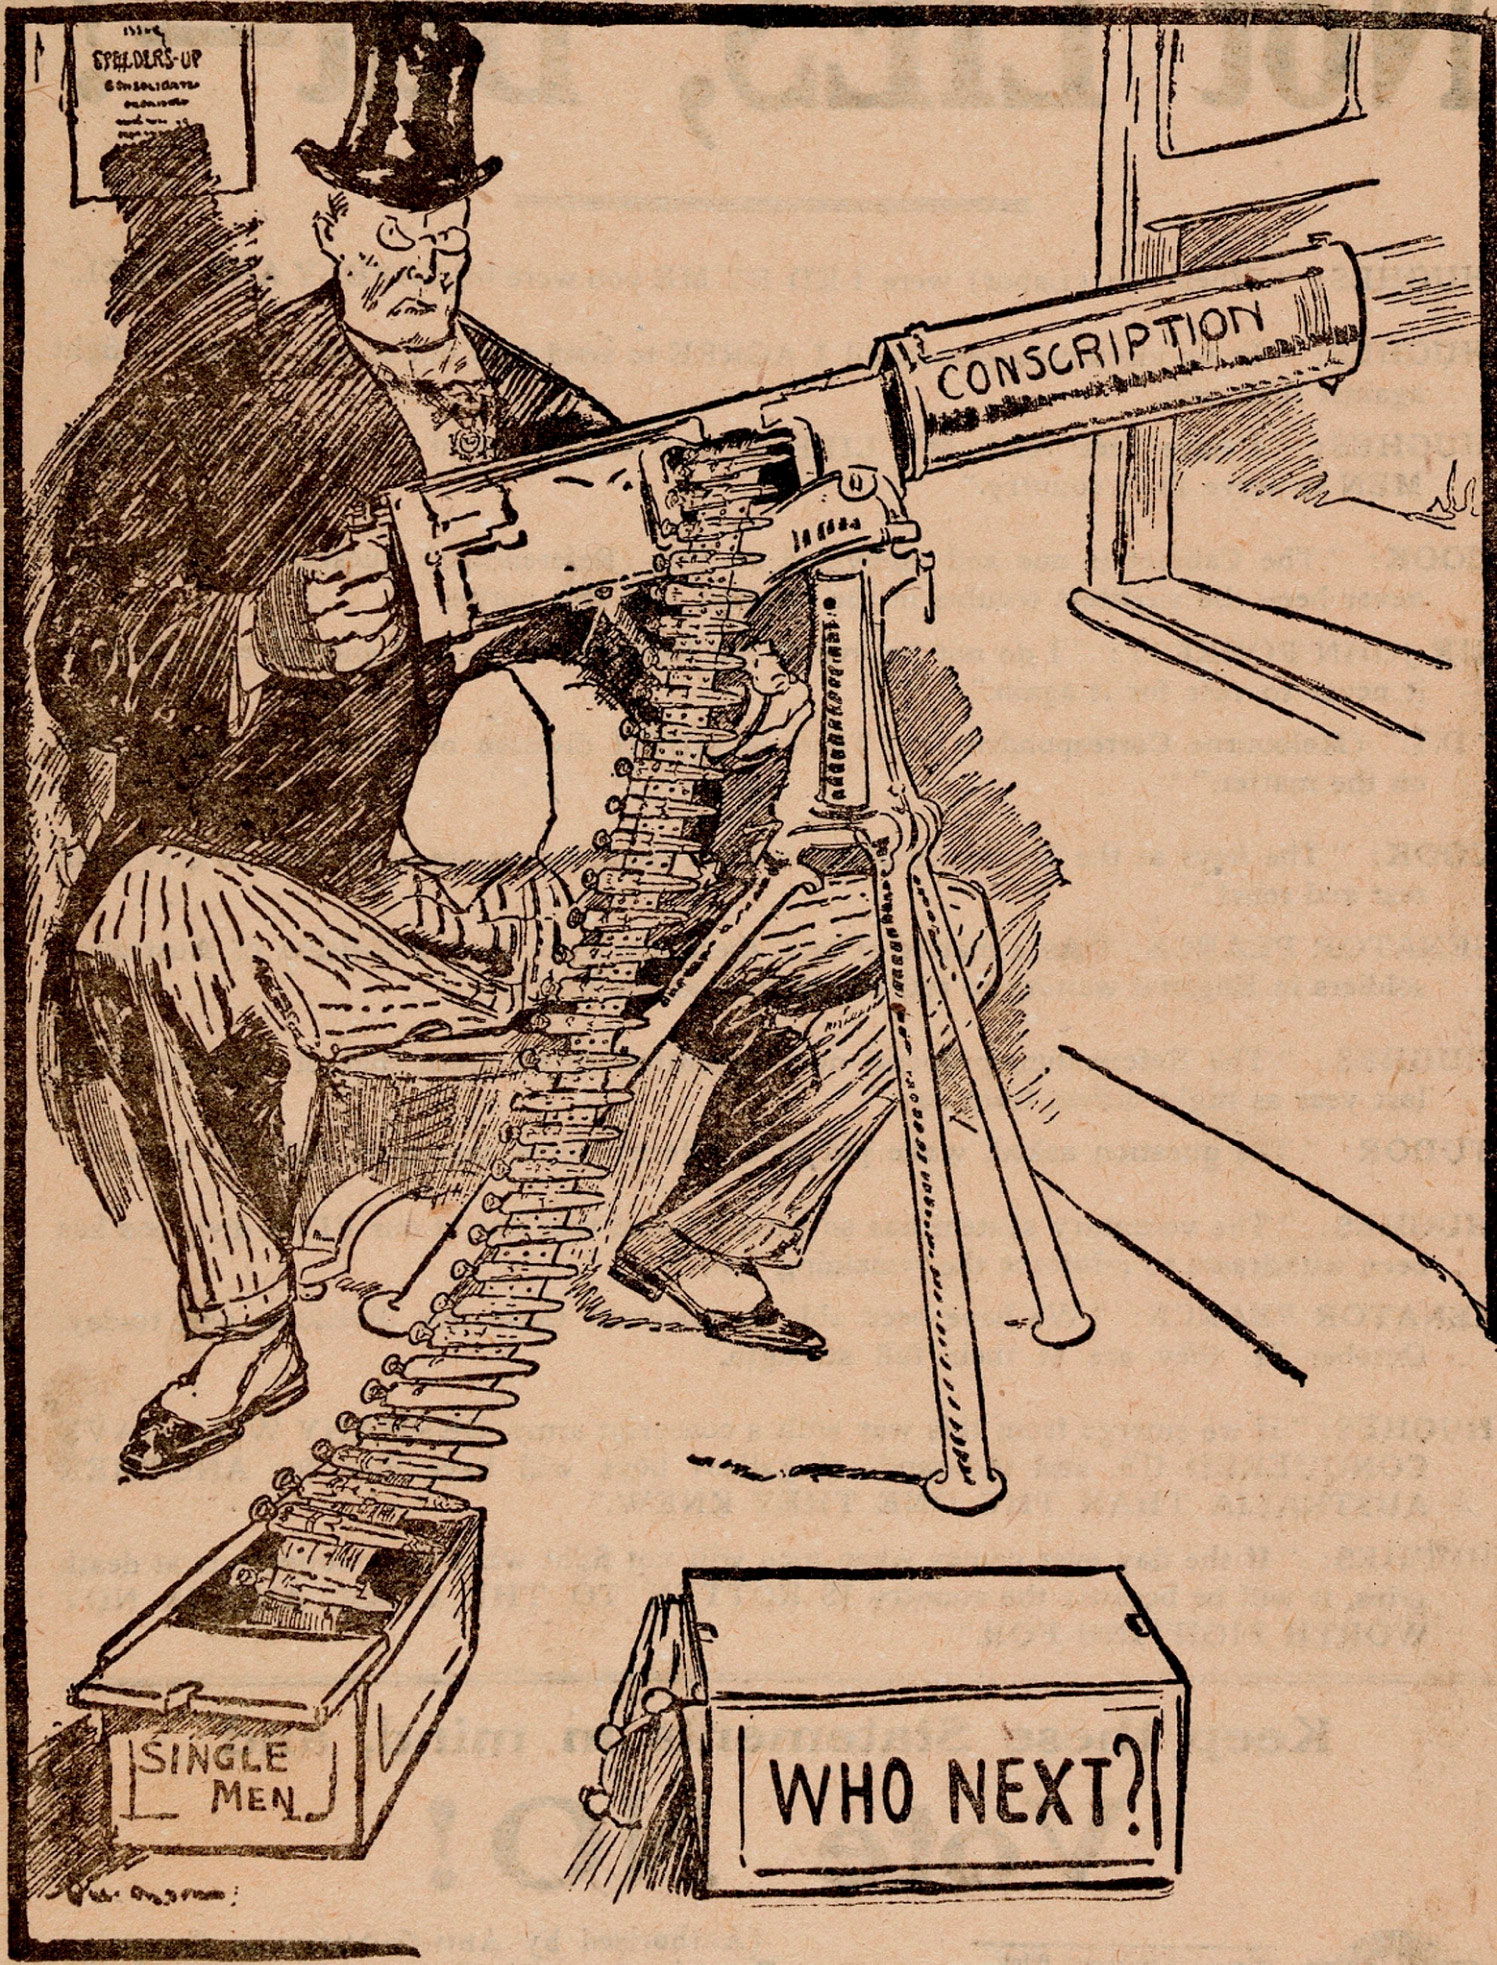 ‘Who next?’ leaflet, 1916 or 1917.